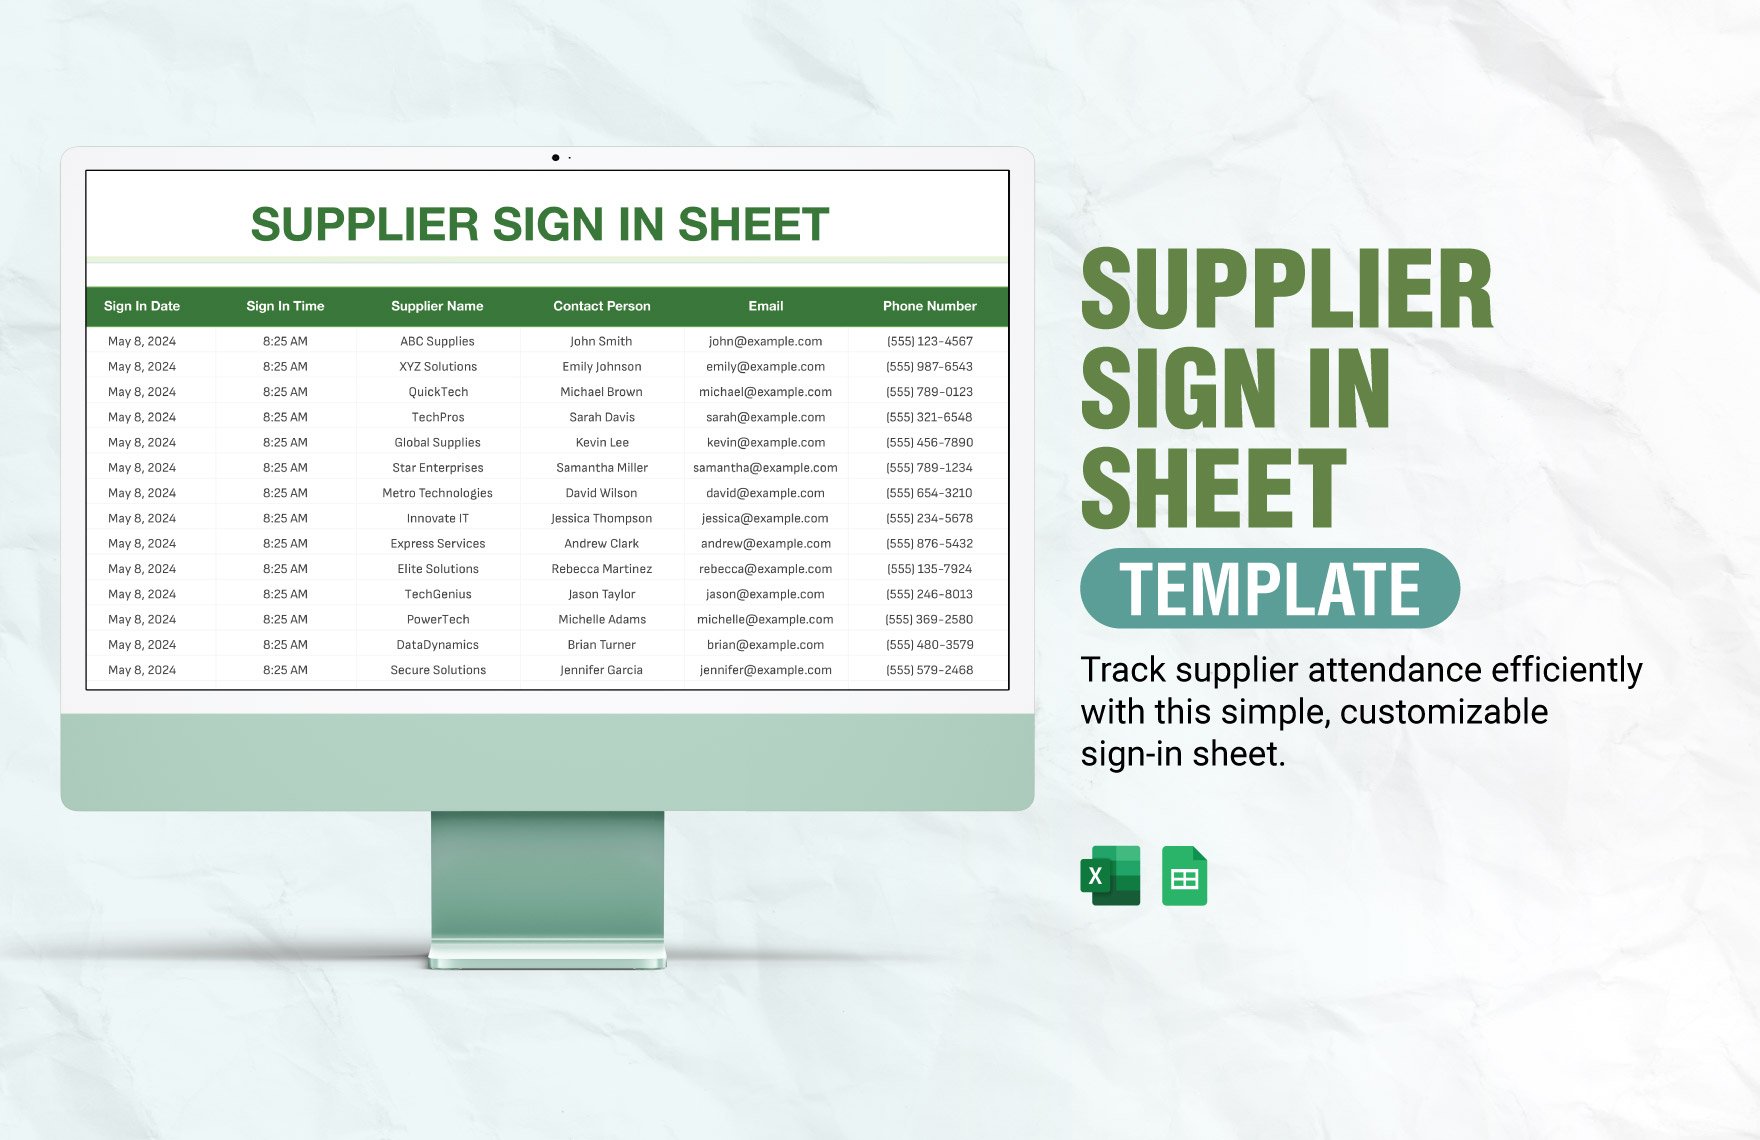 Supplier Sign in Sheet Template in Excel, Google Sheets